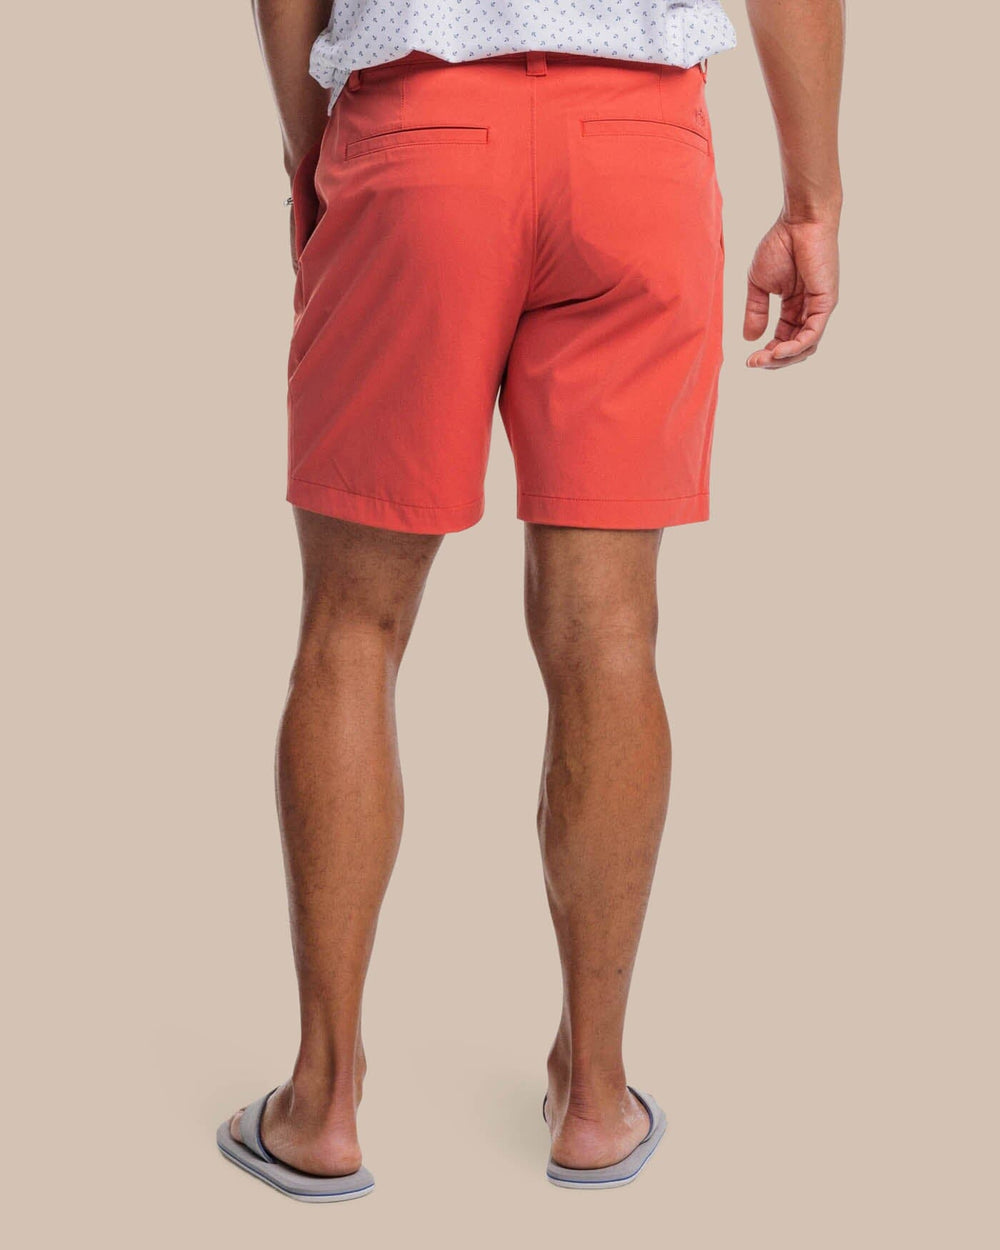 The back view of the Southern Tide brrr°®-die 8 Inch Performance Short by Southern Tide - Mineral Red